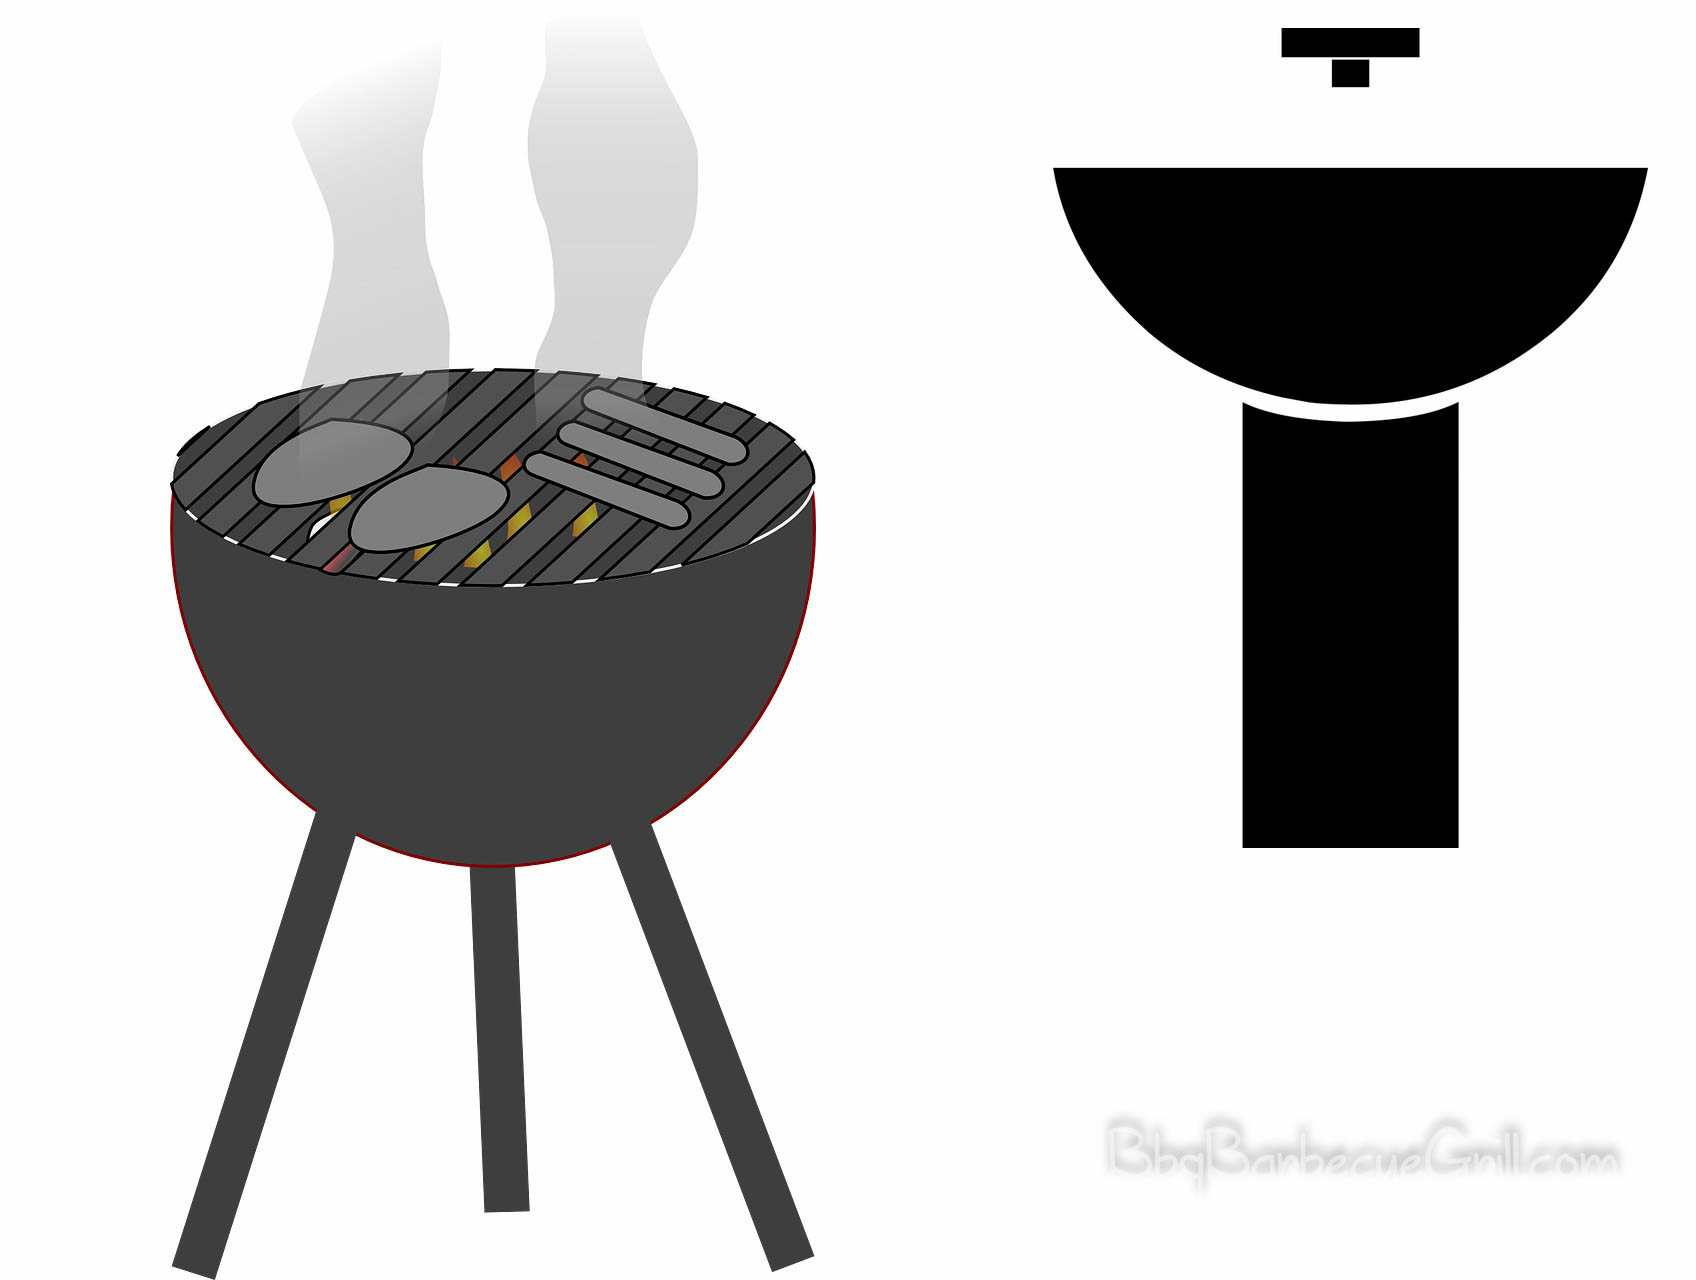 Grilling in the backyard